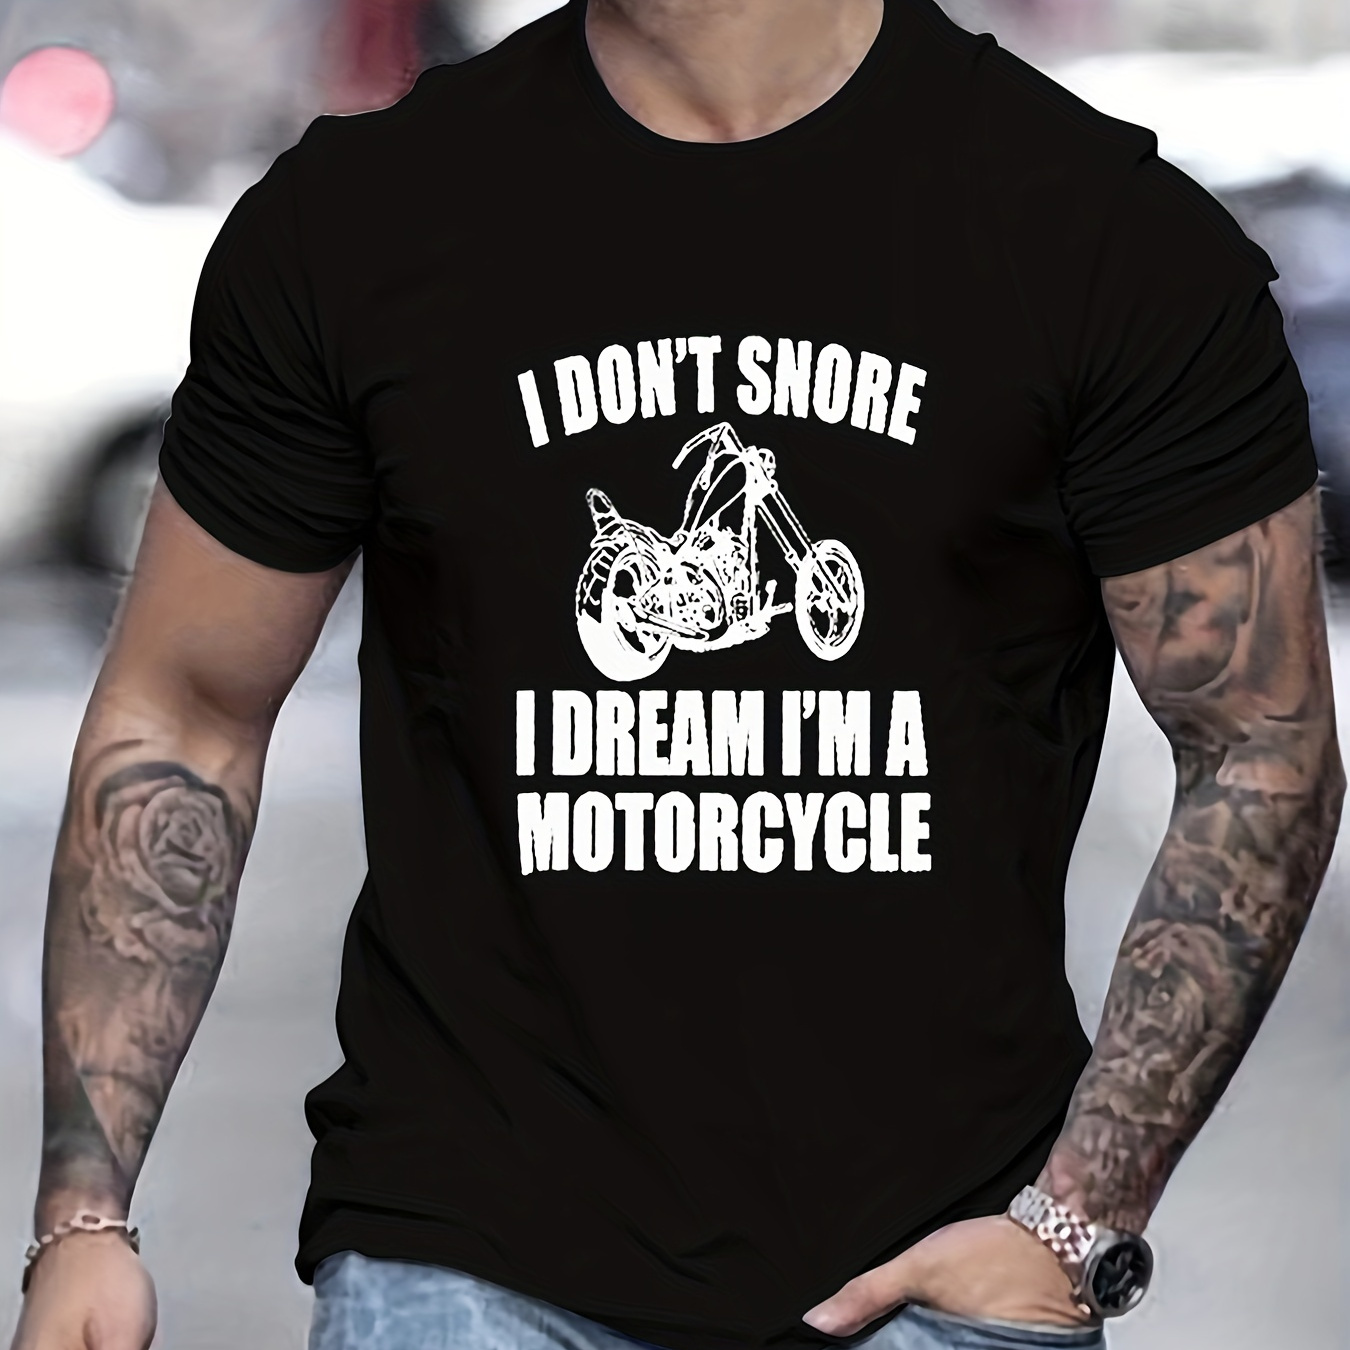 

Motorcycle & Letter Pattern Print Men's Comfy T-shirt, Graphic Tee Men's Summer Outdoor Clothes, Men's Clothing, Tops For Men, Gift For Men